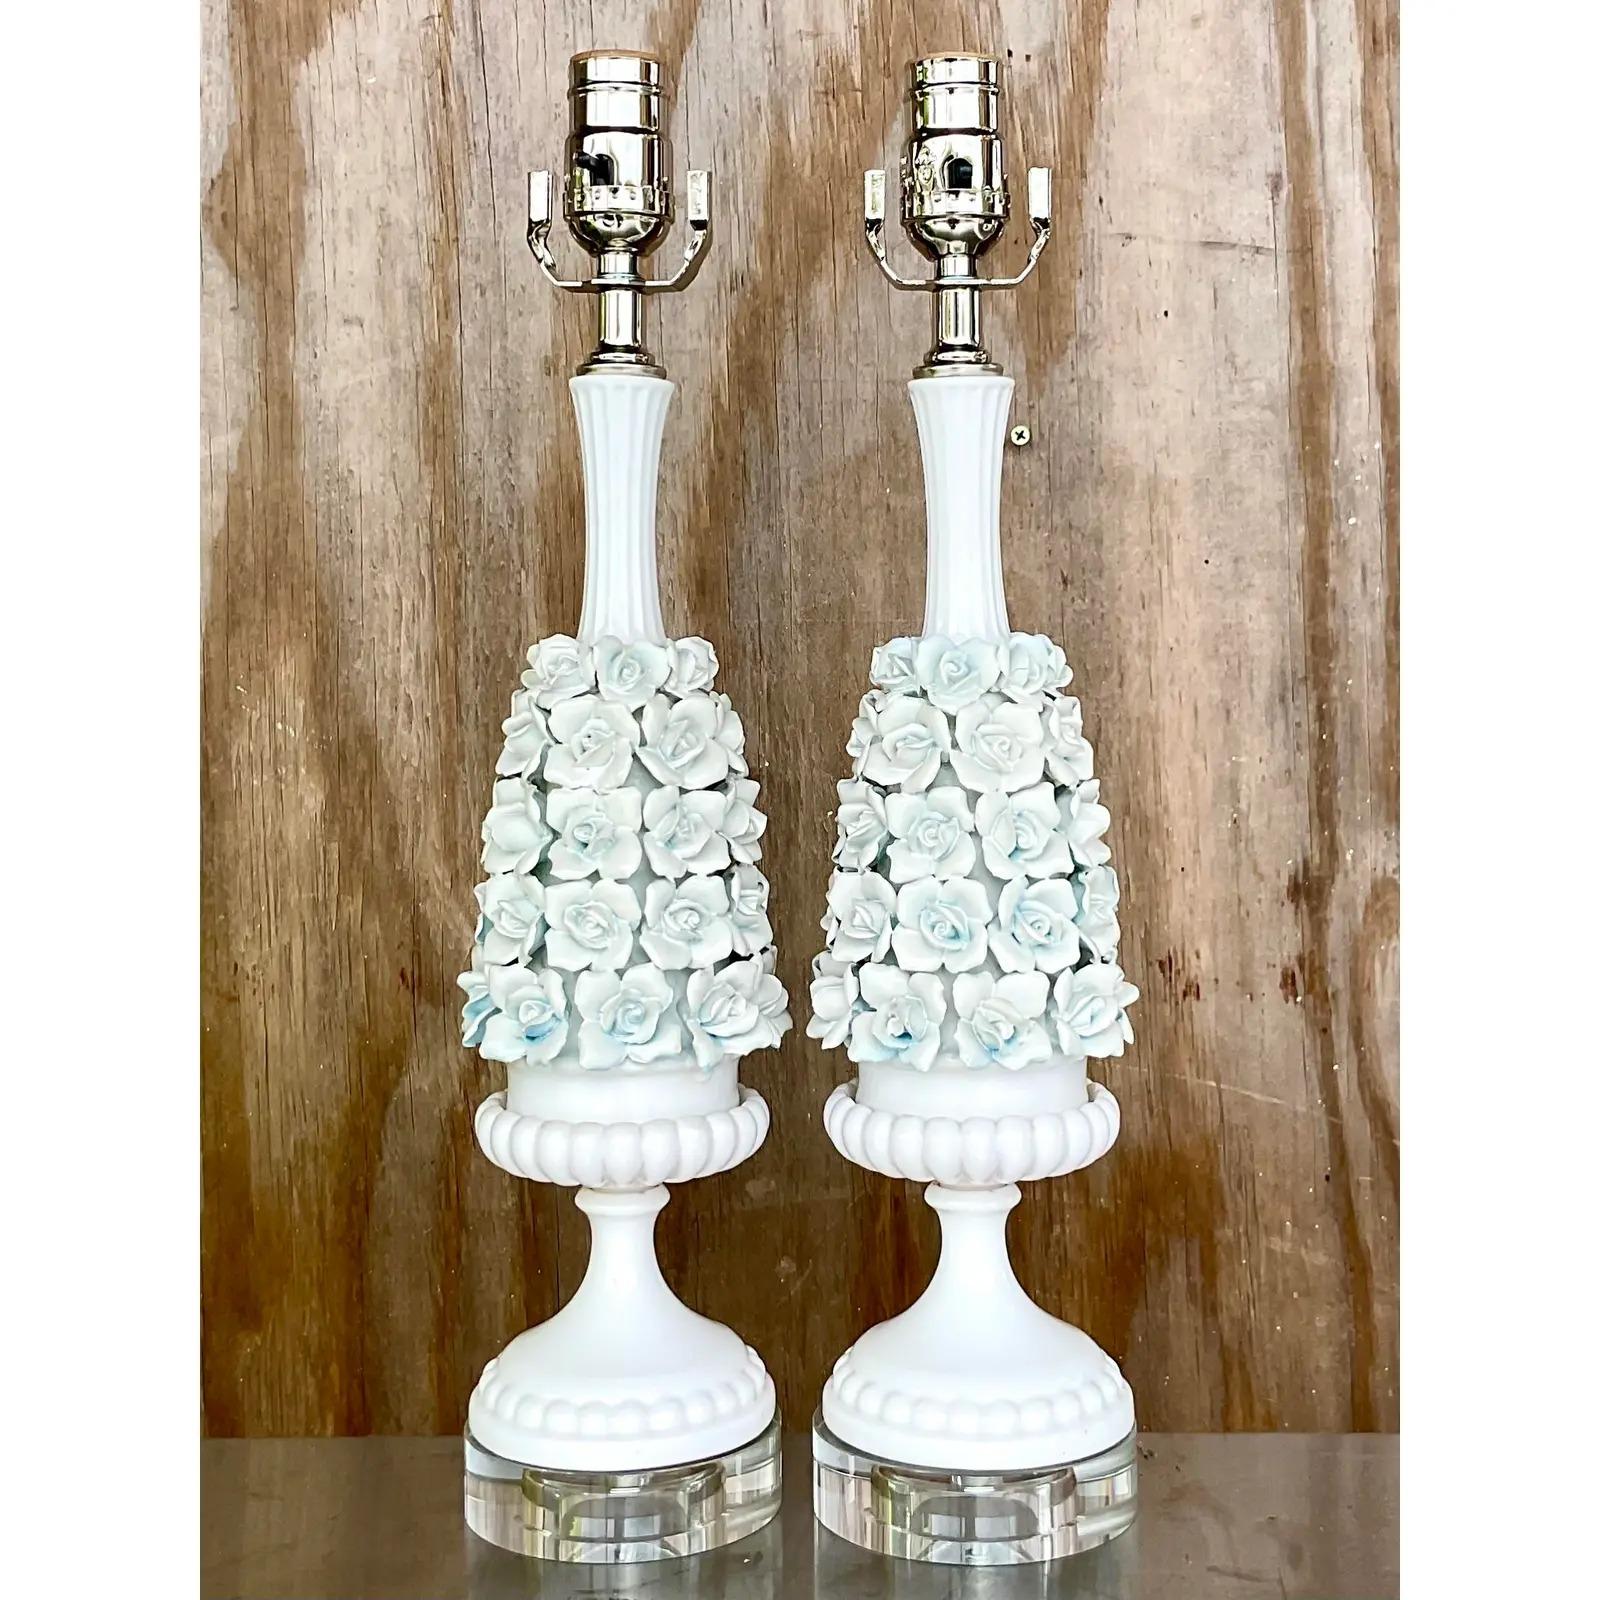 Gorgeous pair of chic roses lamps. Beautiful white flowers hand crafted in porcelain with the faintest light blue peeking through. Fully restored with all new wiring and hardware with crystal plinths. Acquired from a Palm Beach estate.